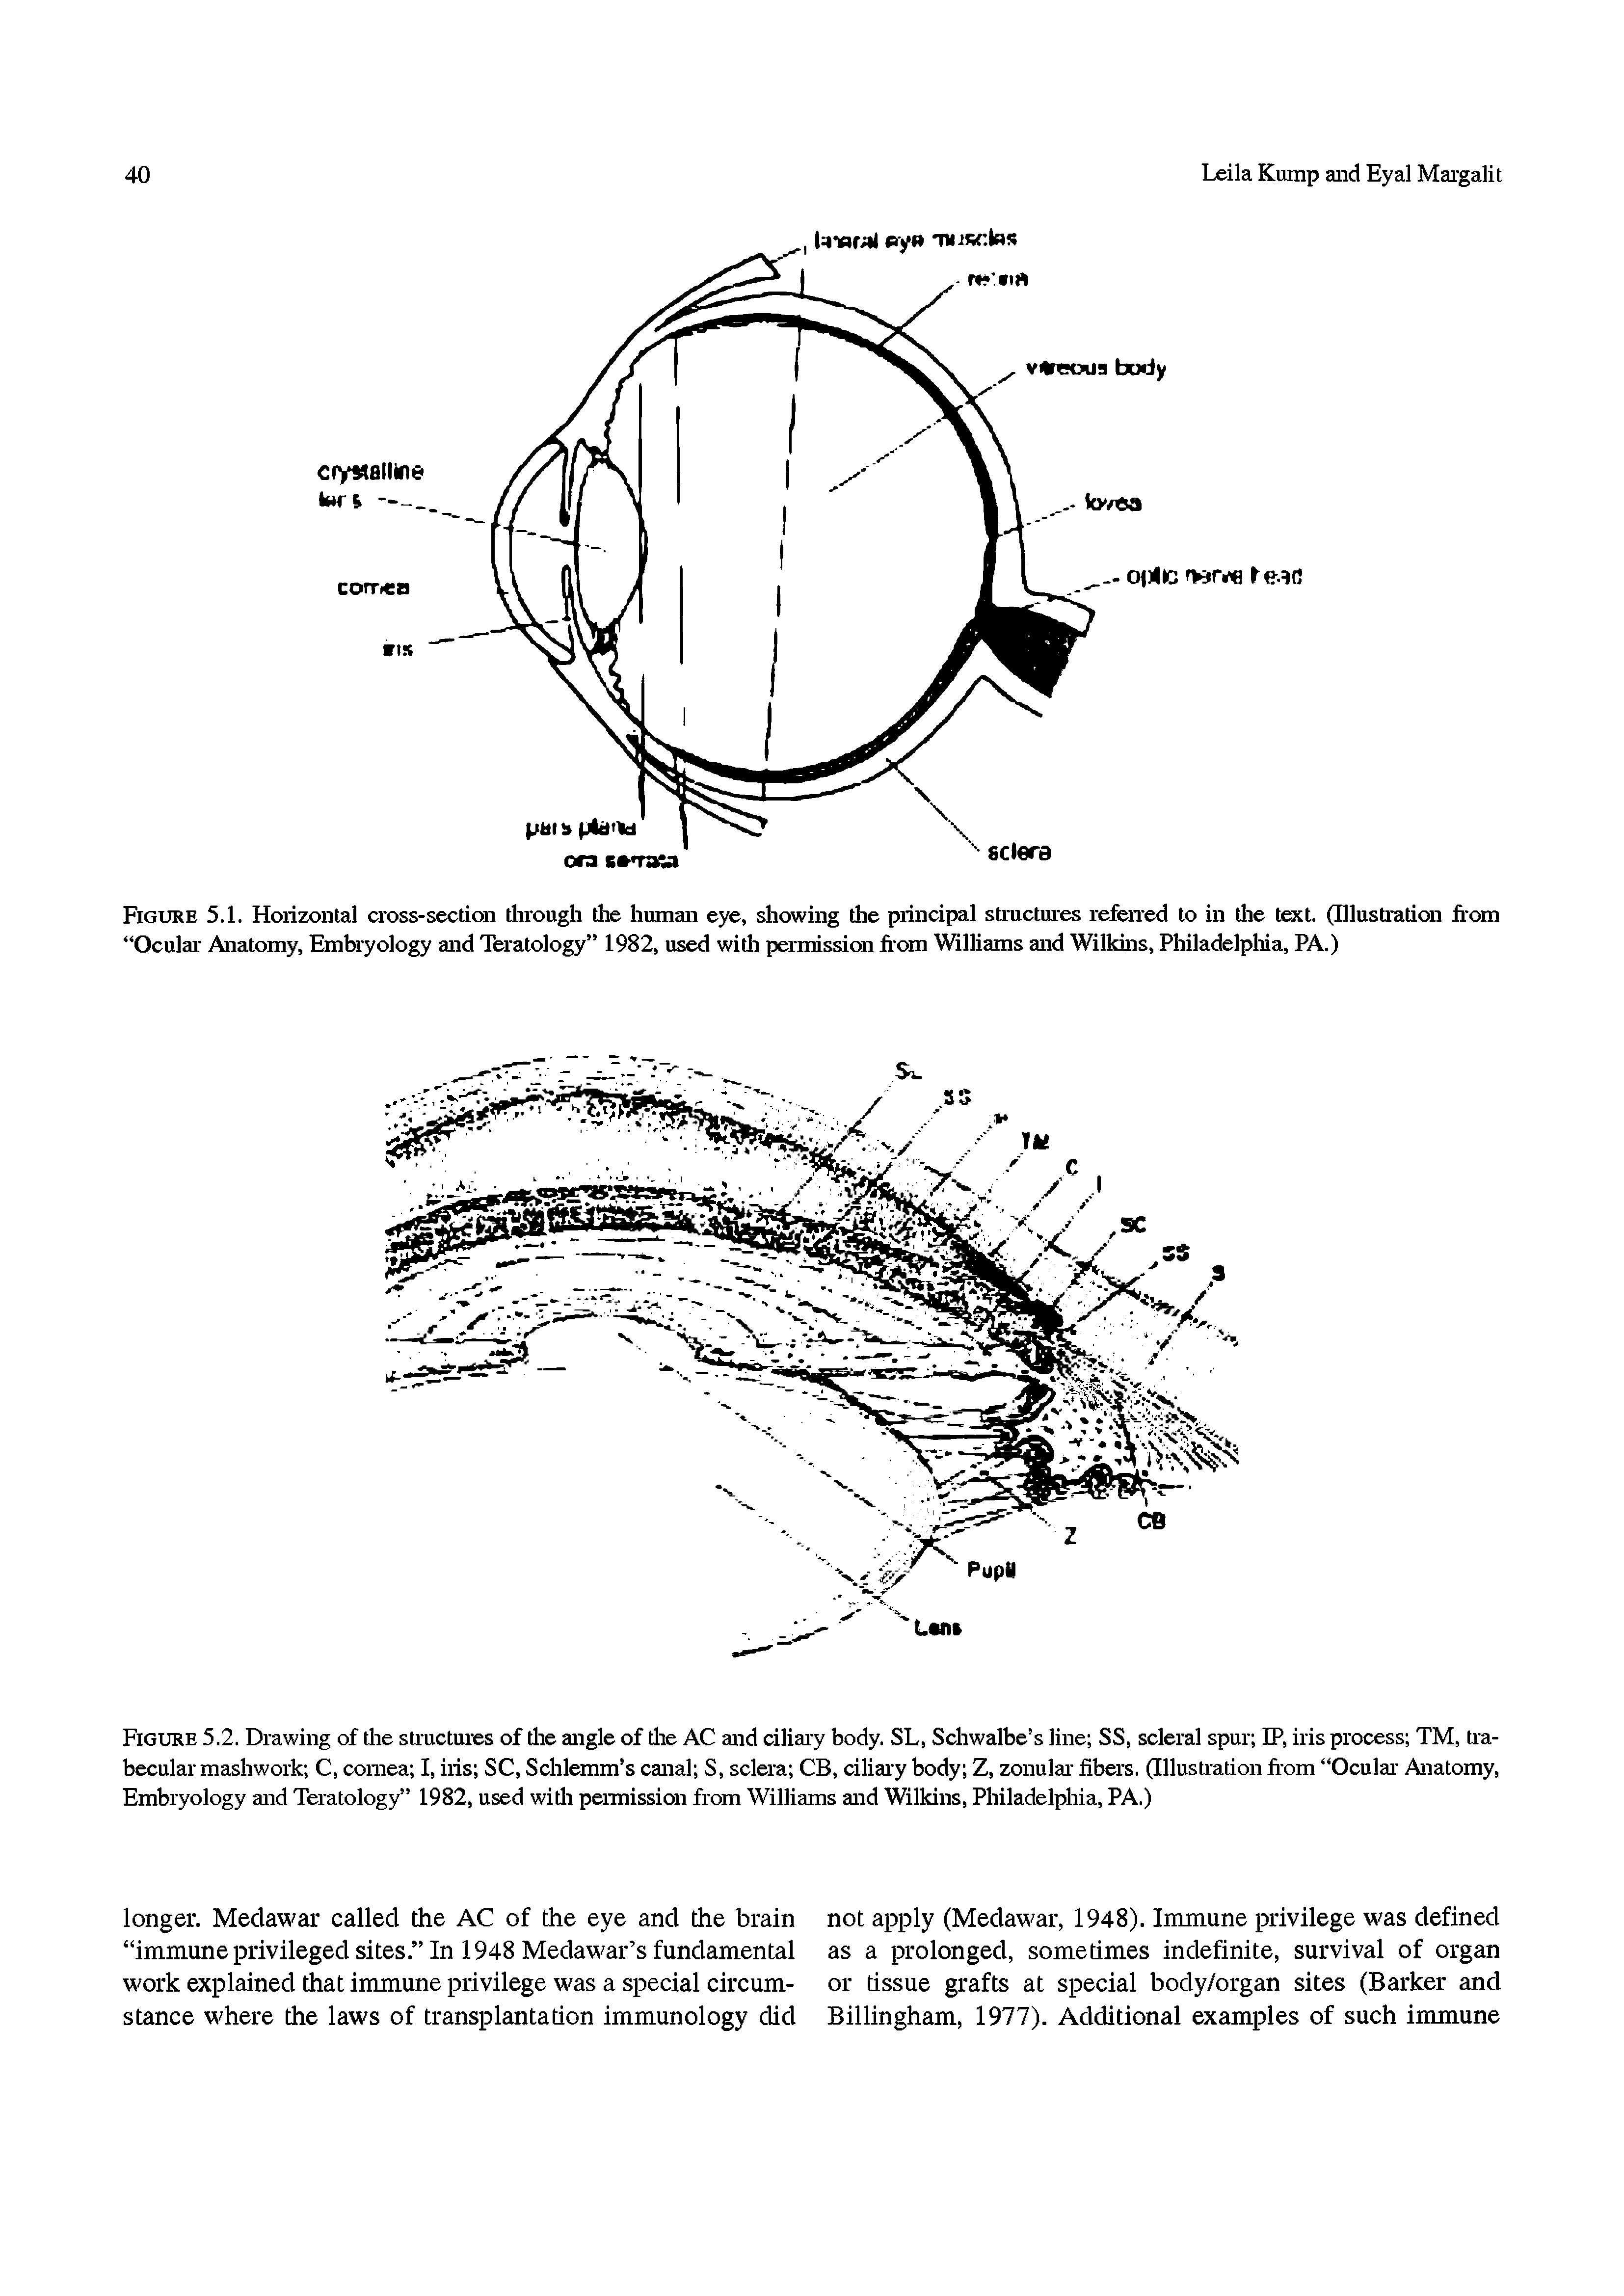 Figure 5.2. Drawing of tlie stiuctures of tlie angle of tlie AC and ciliary body. SL, Schwalbe s line SS, scleral spur IP, iris process TM, Ua-becular mashwork C, cornea I, iris SC, Schlemm s canal S, sclera CB, ciliar y body Z, zonular- fibers. (IllusUation from Ocular- Anatomy, Embryology and Teratology 1982, used witli permission from Williams and Wilkins, Philadelphia, PA.)...